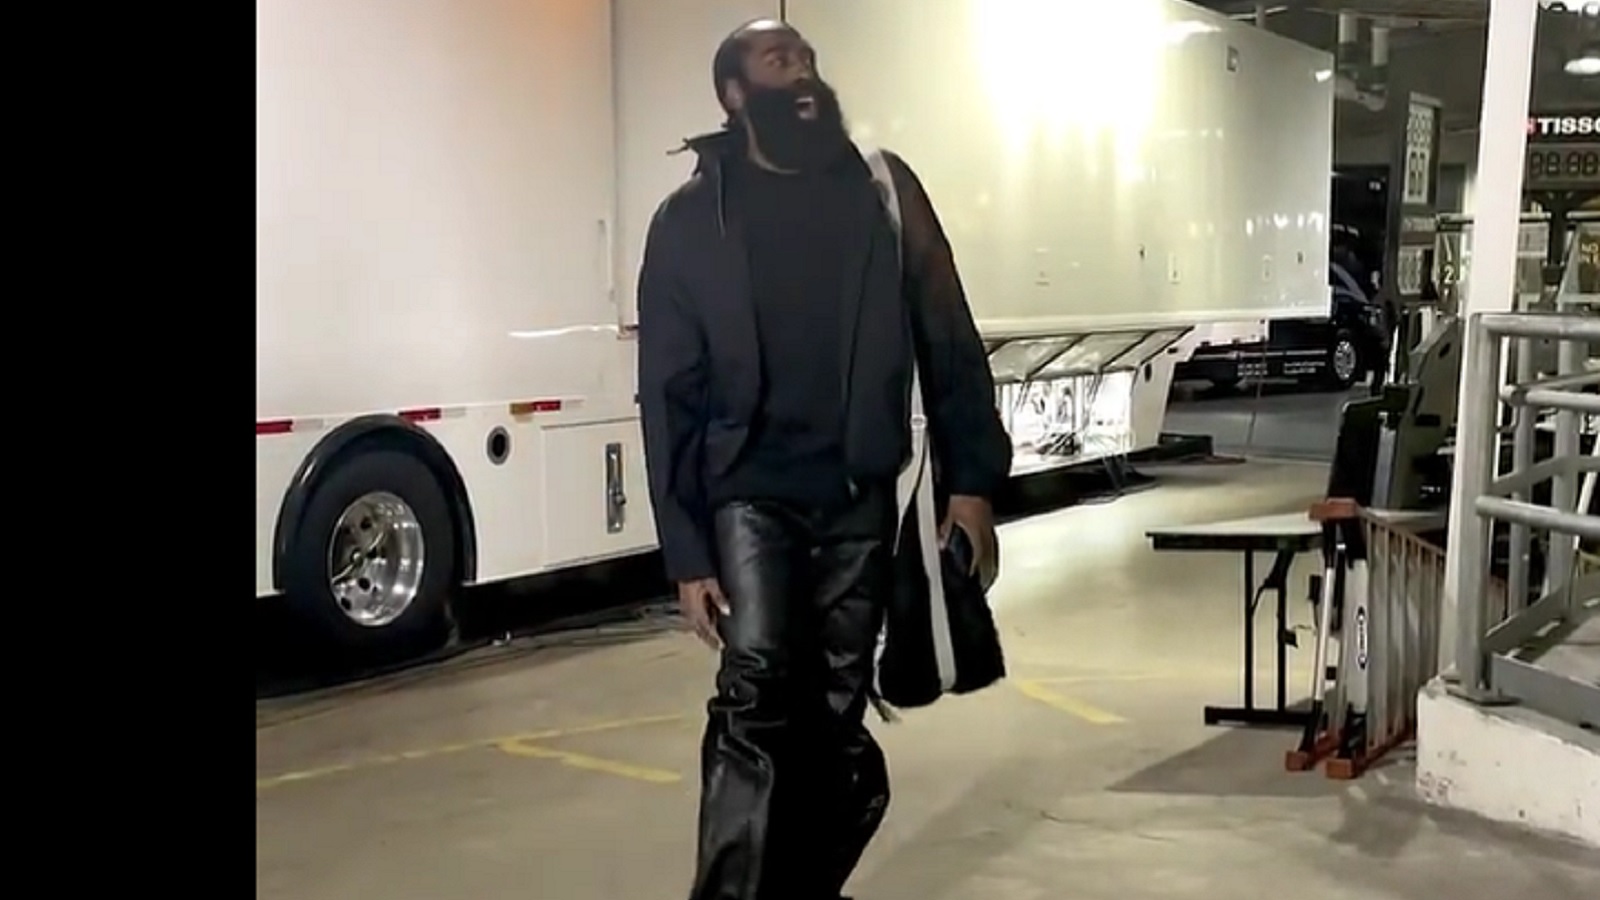 James Harden showed up to Game 4 wearing ridiculous pants